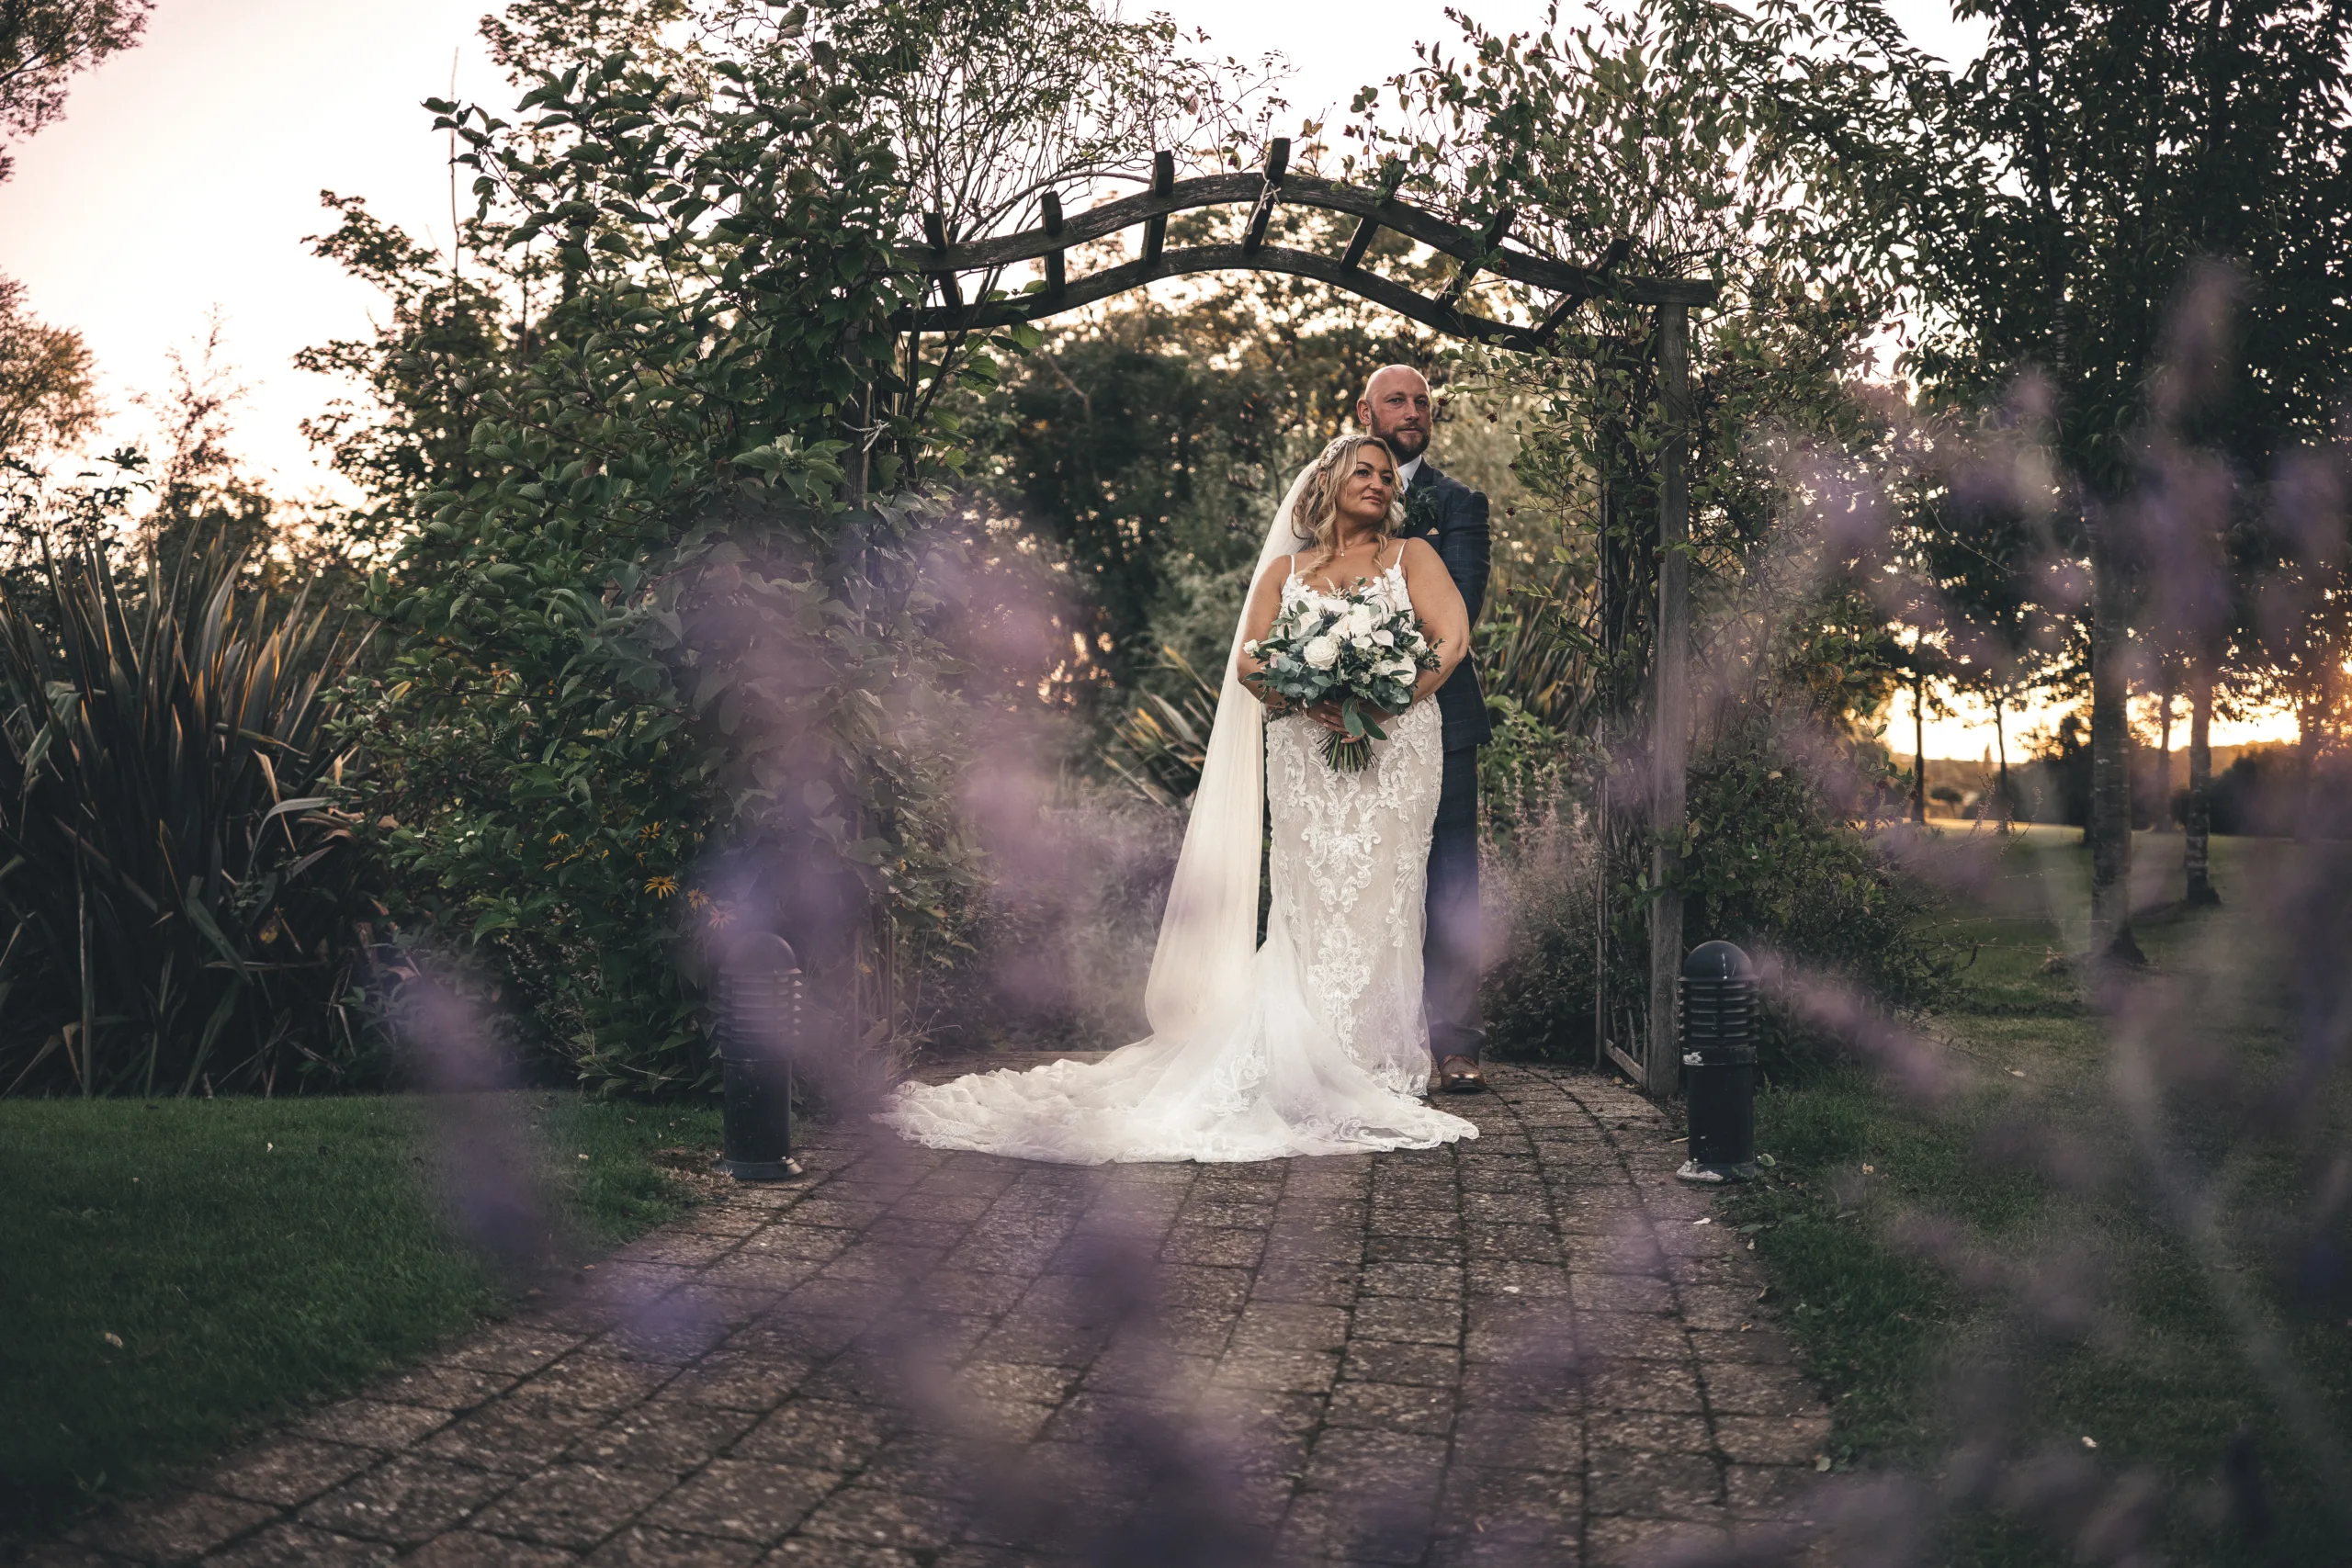 A bride and groom posing under an archway in a garden, captured by a Yorkshire photographer.